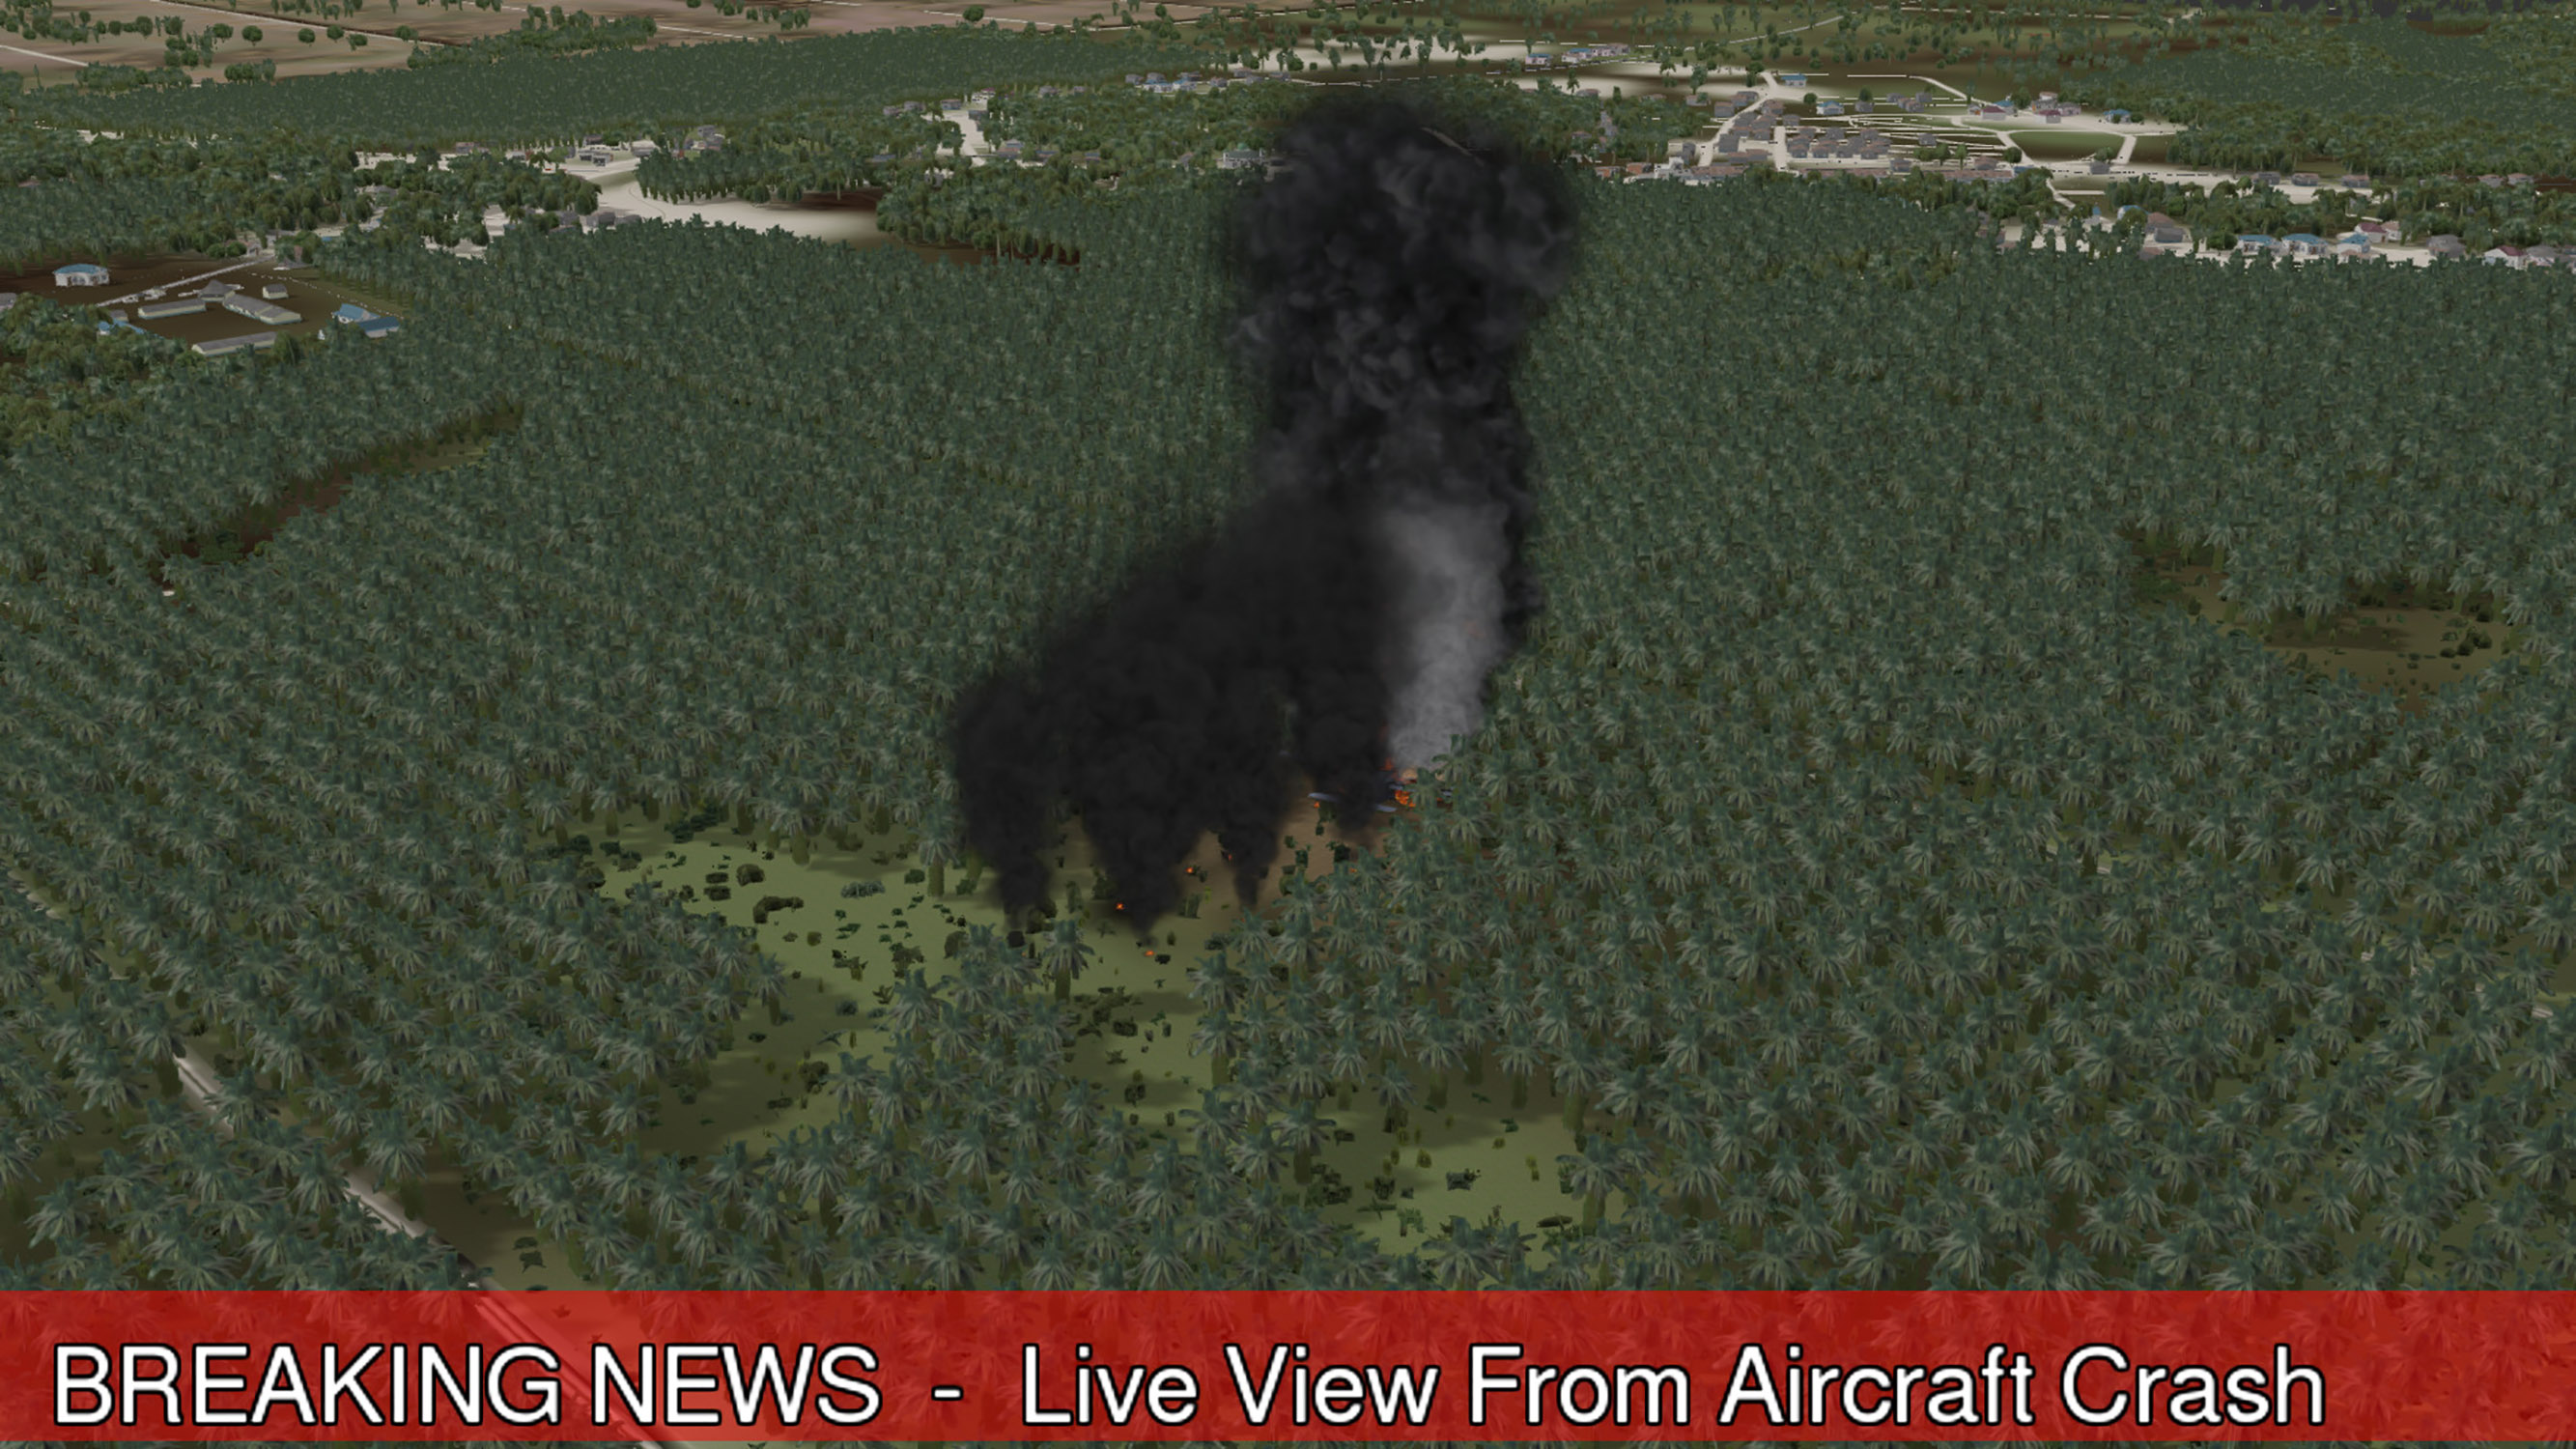 News coverage of aircraft crash in the forest surrounded by fire added by instructors. 